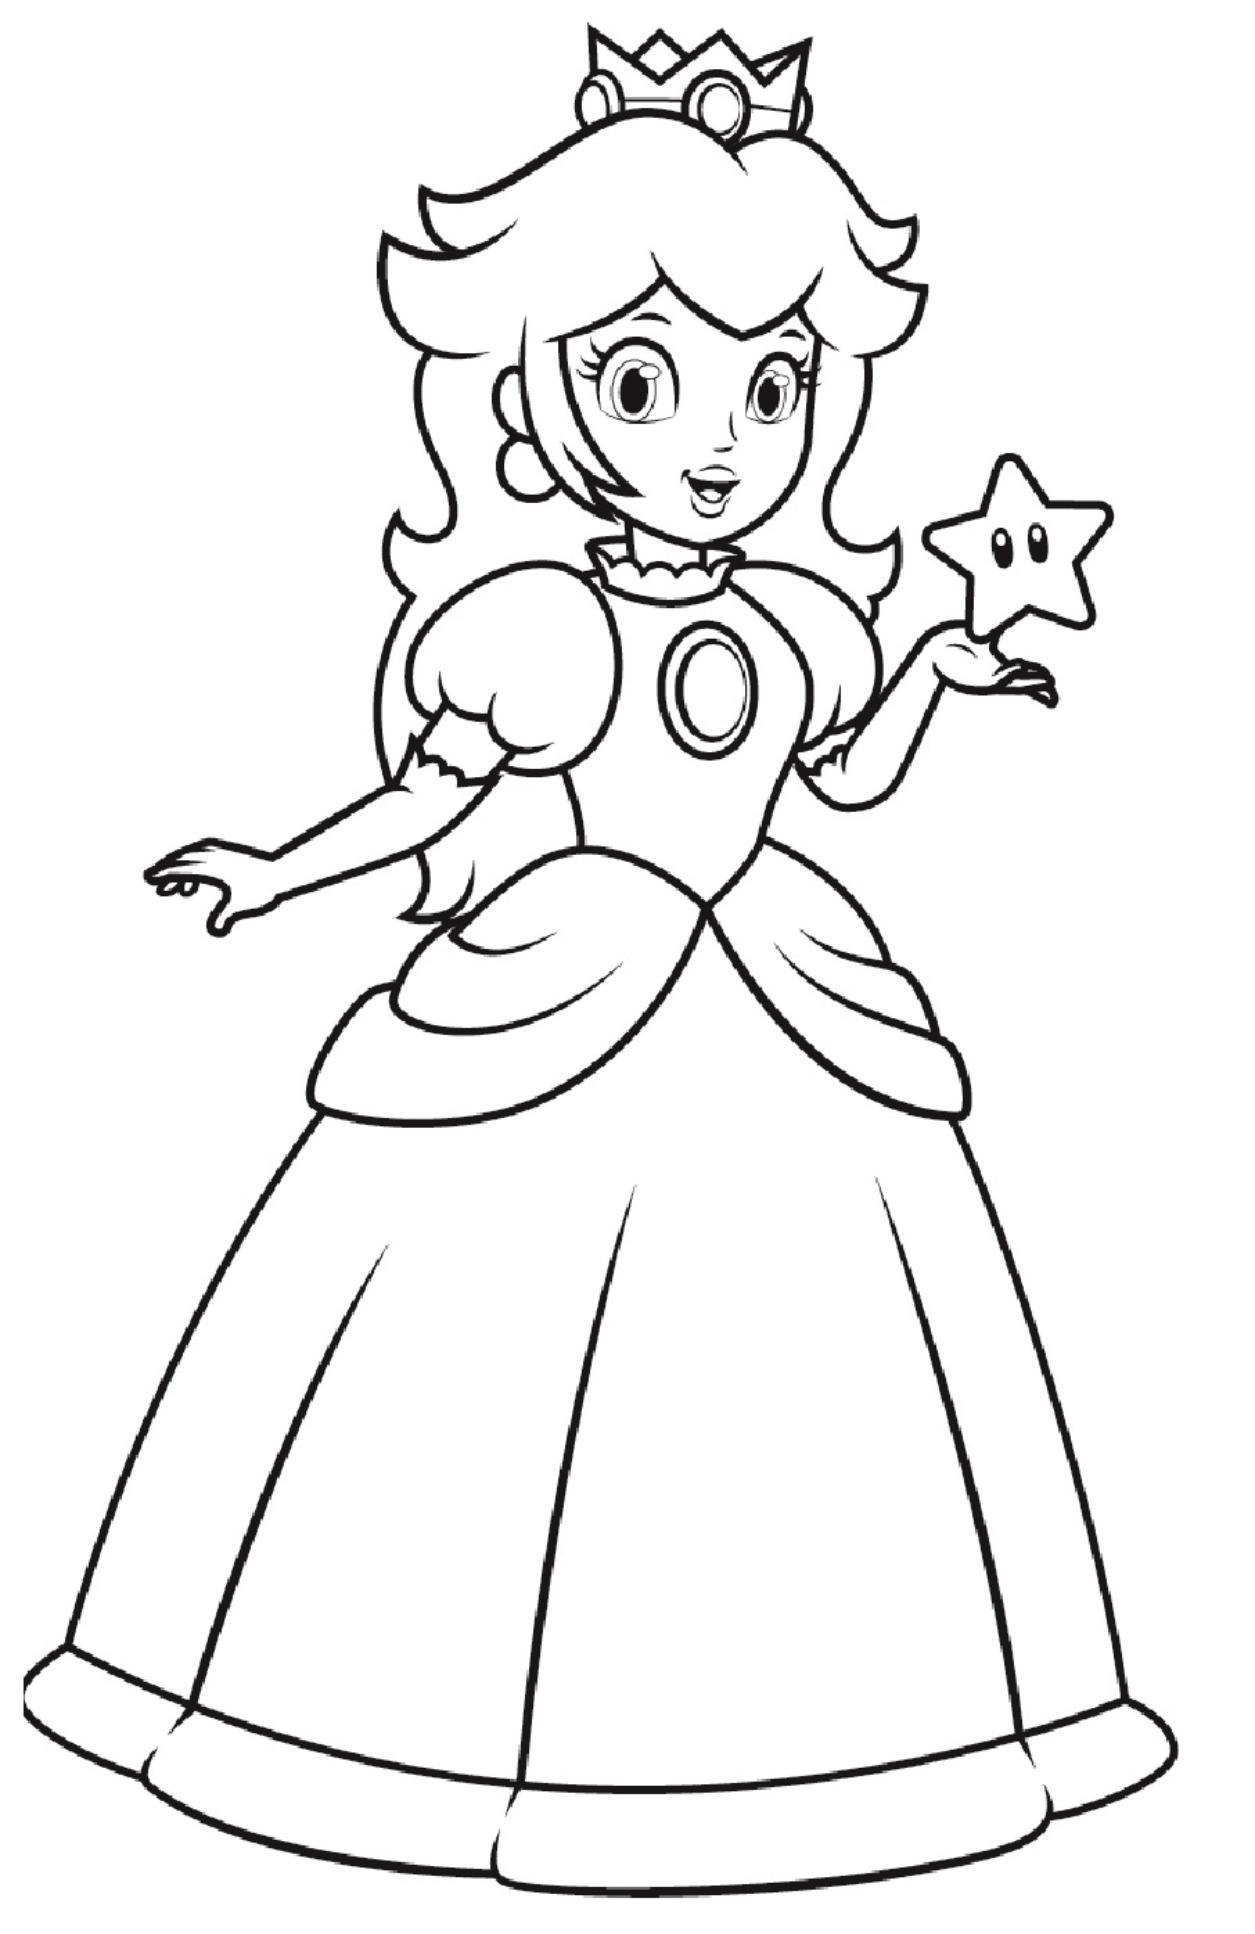 Princess Peach From Super Mario Bros Coloring Page Easy Drawing Guides ...